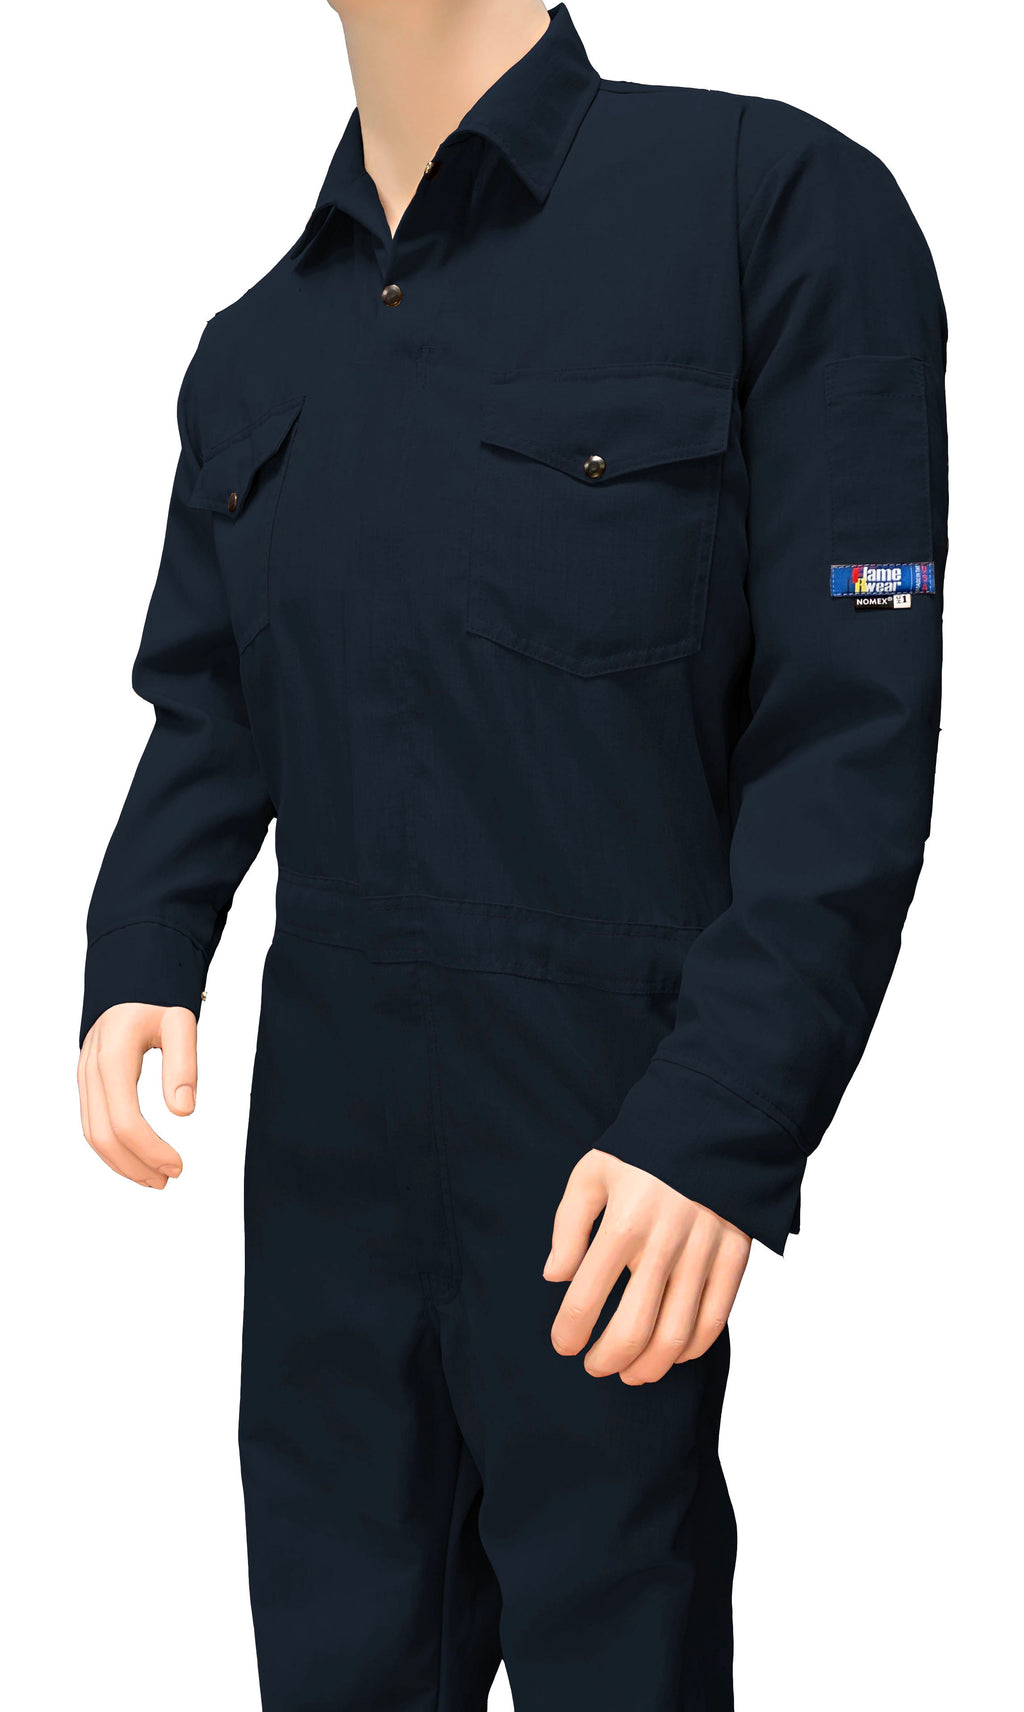 FlameRwear, FR Coverall Deluxe, fwCn4, Nomex 4.5 oz, Cat1, Navy